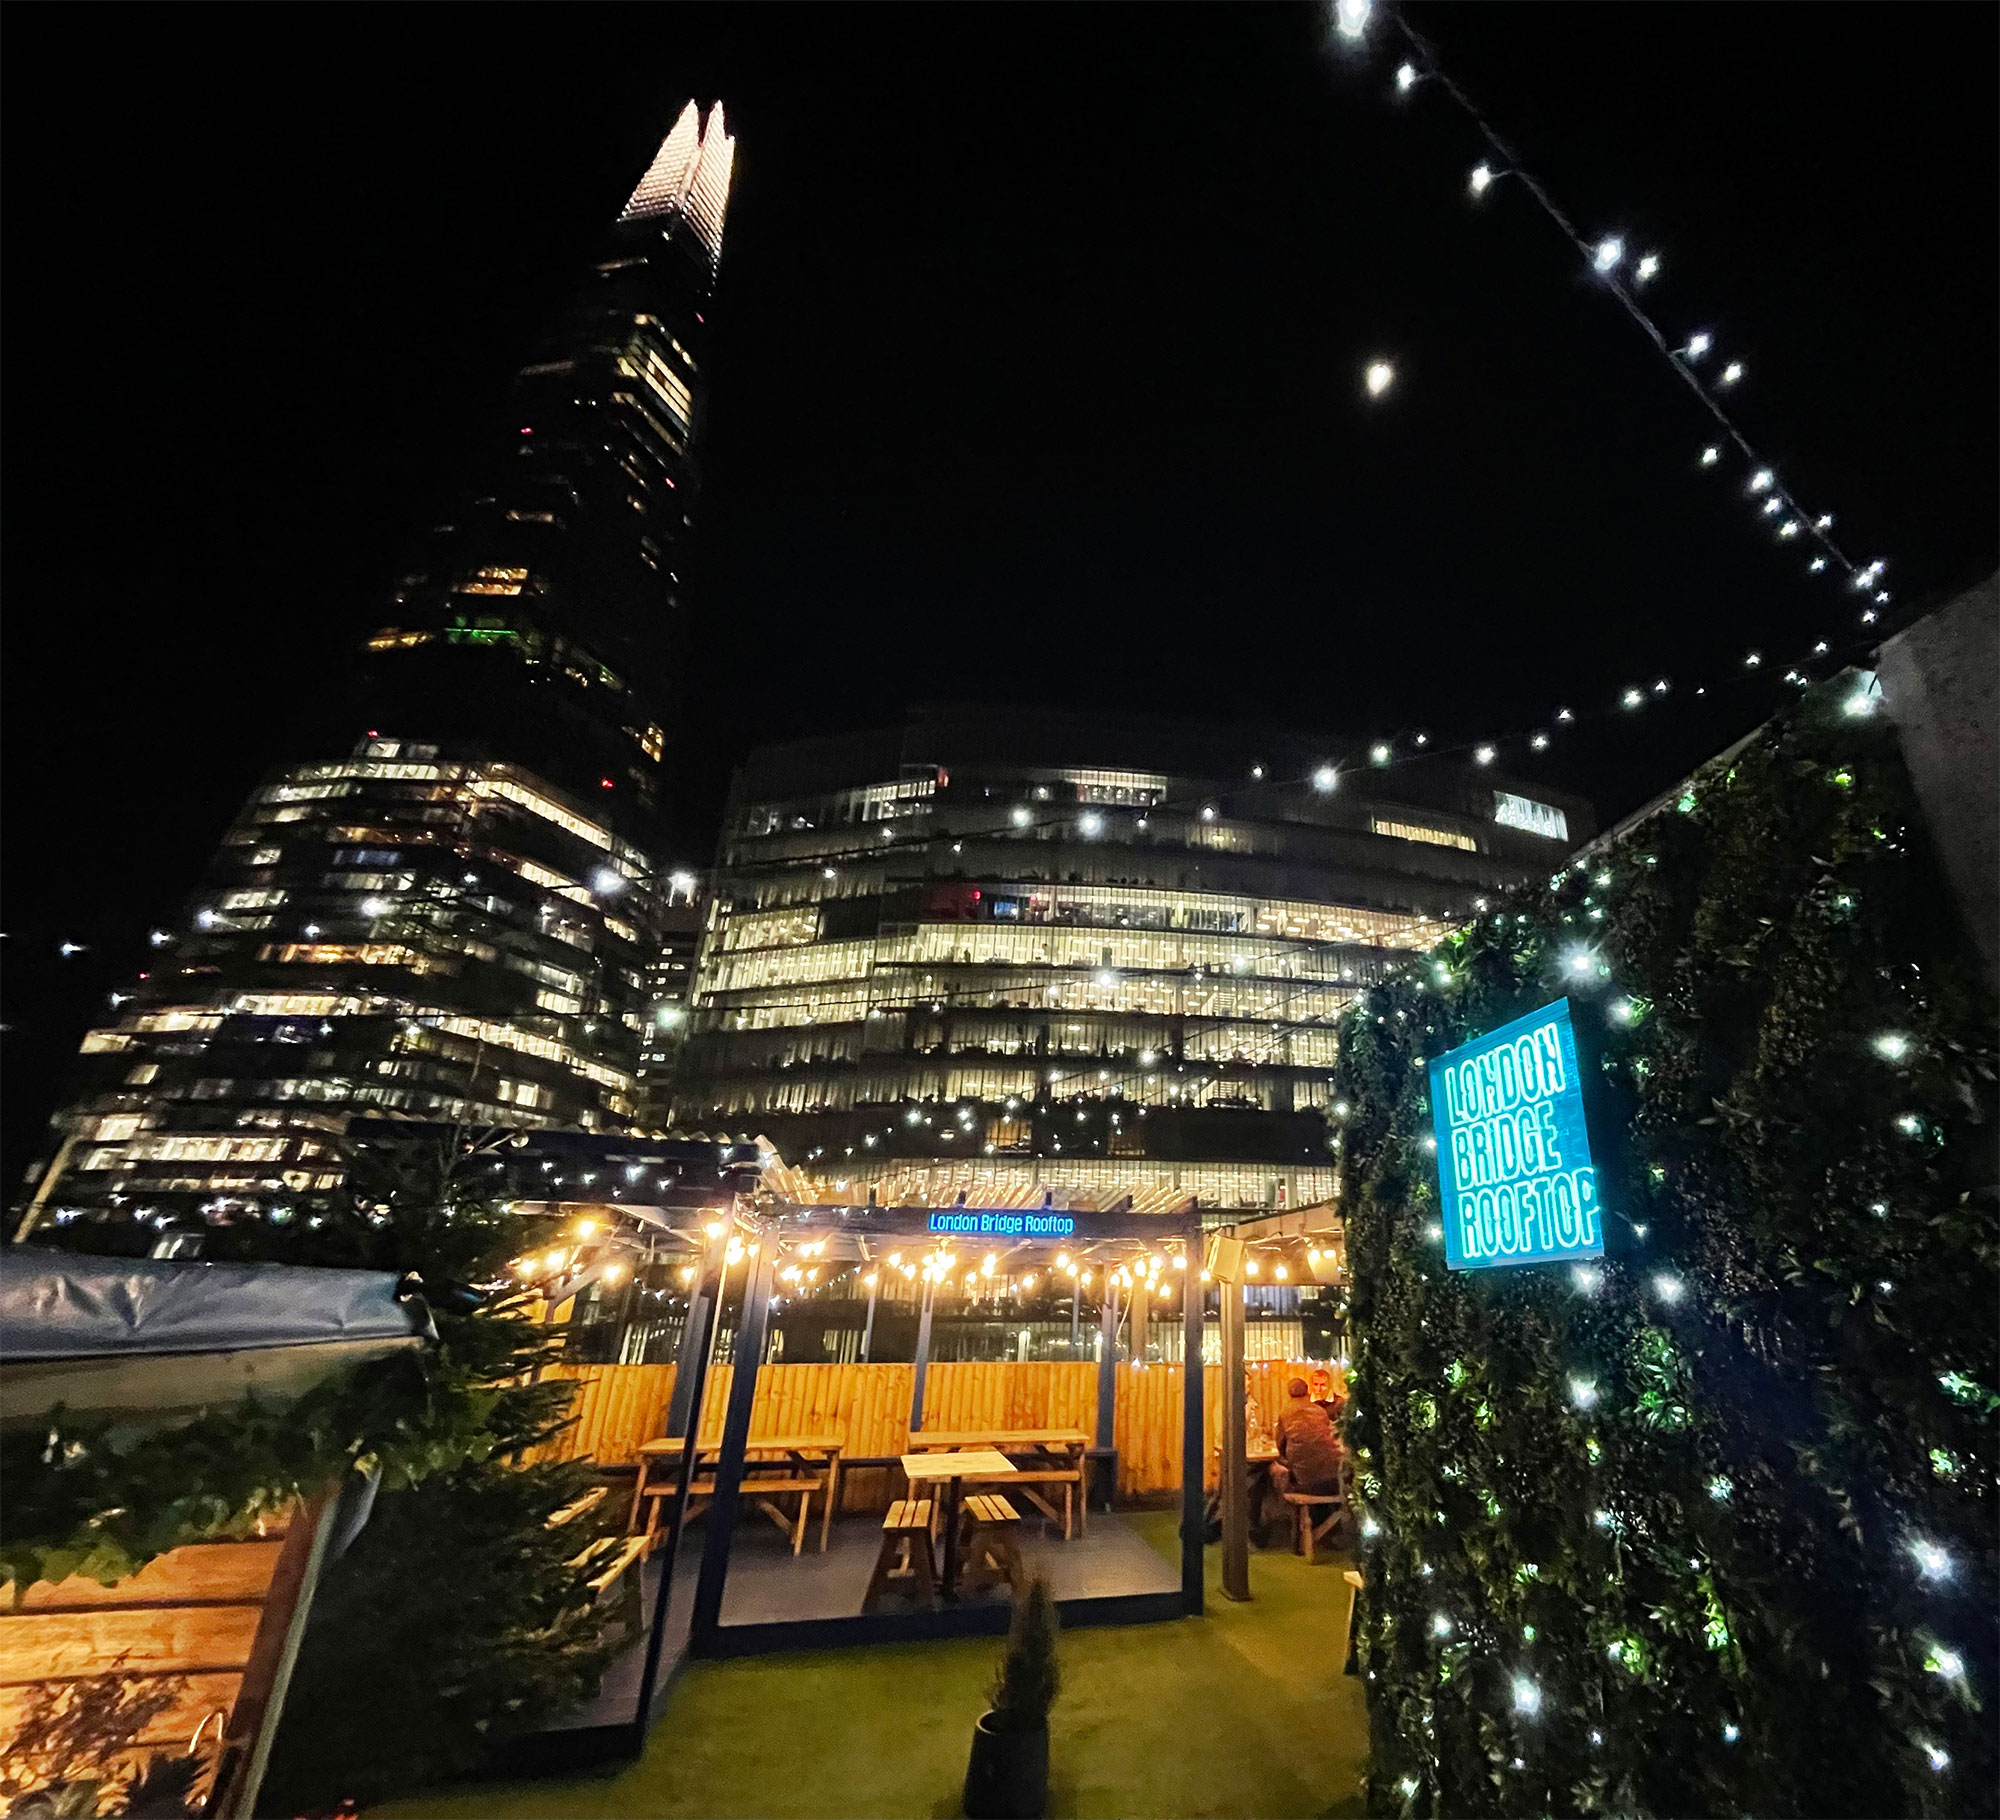 HEATERS AND COVER AT LONDON’S WINTER ROOFTOP BAR